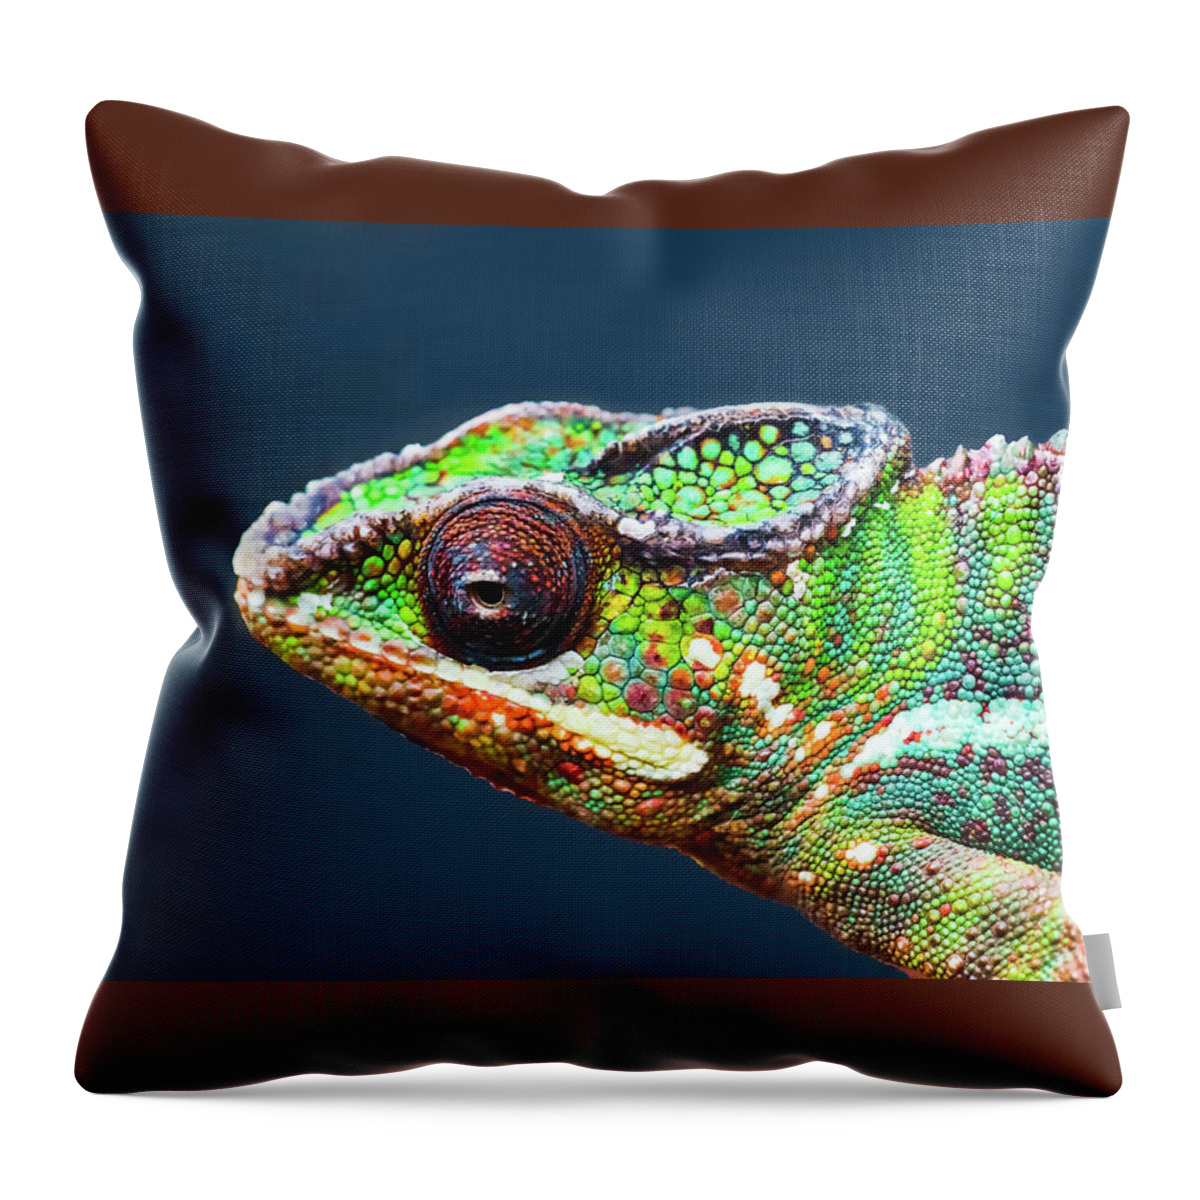 African Chameleon Throw Pillow featuring the photograph African Chameleon by Richard Goldman